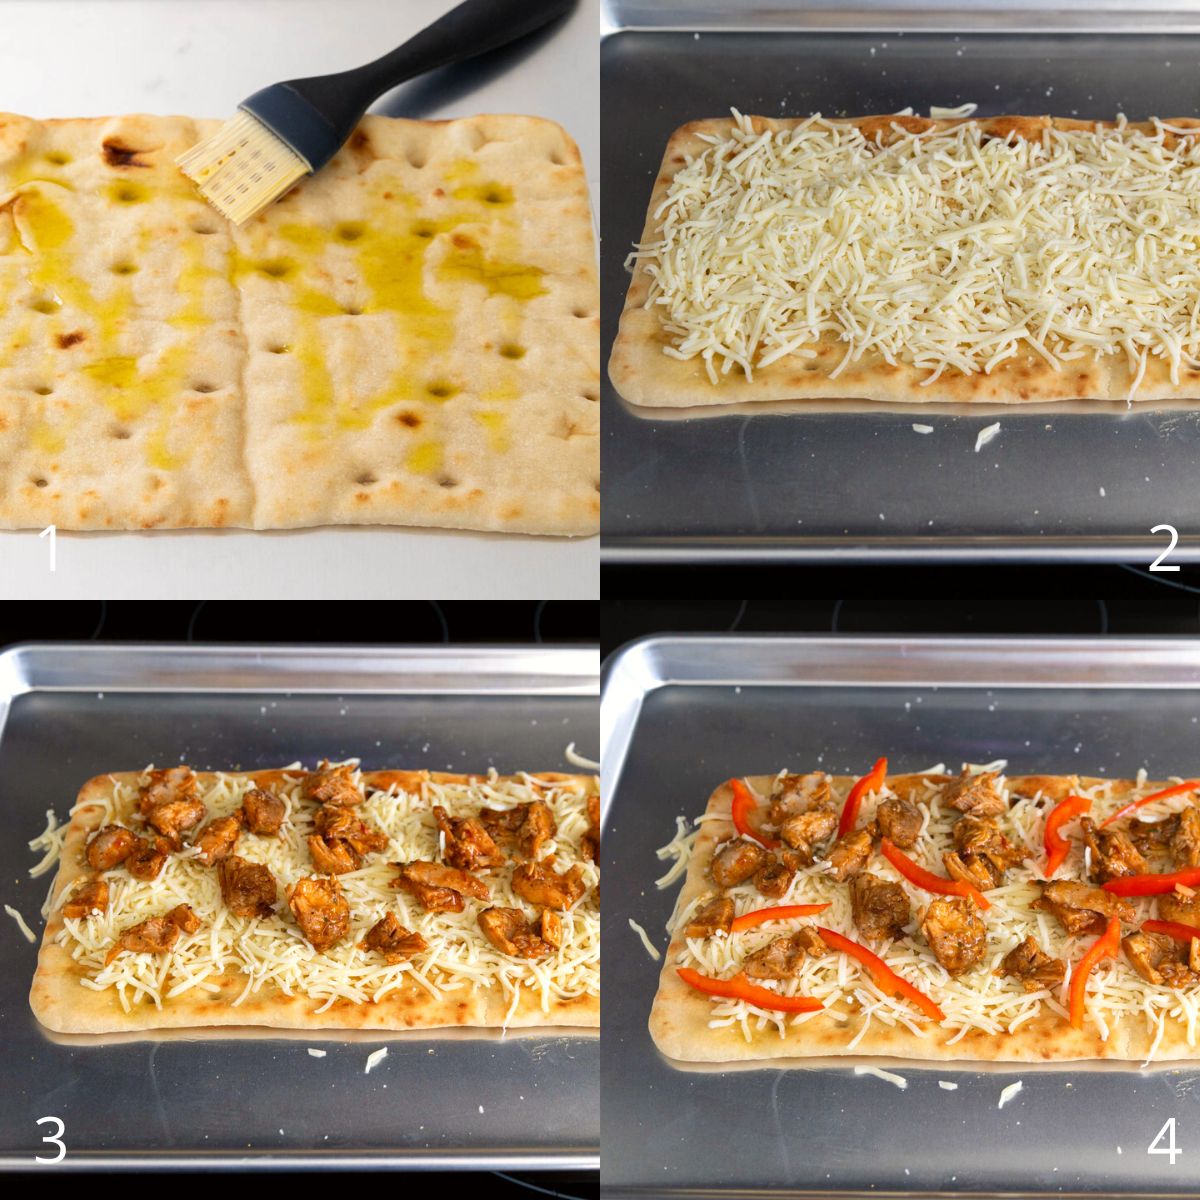 The step by step photo collage shows how to layer the ingredients.